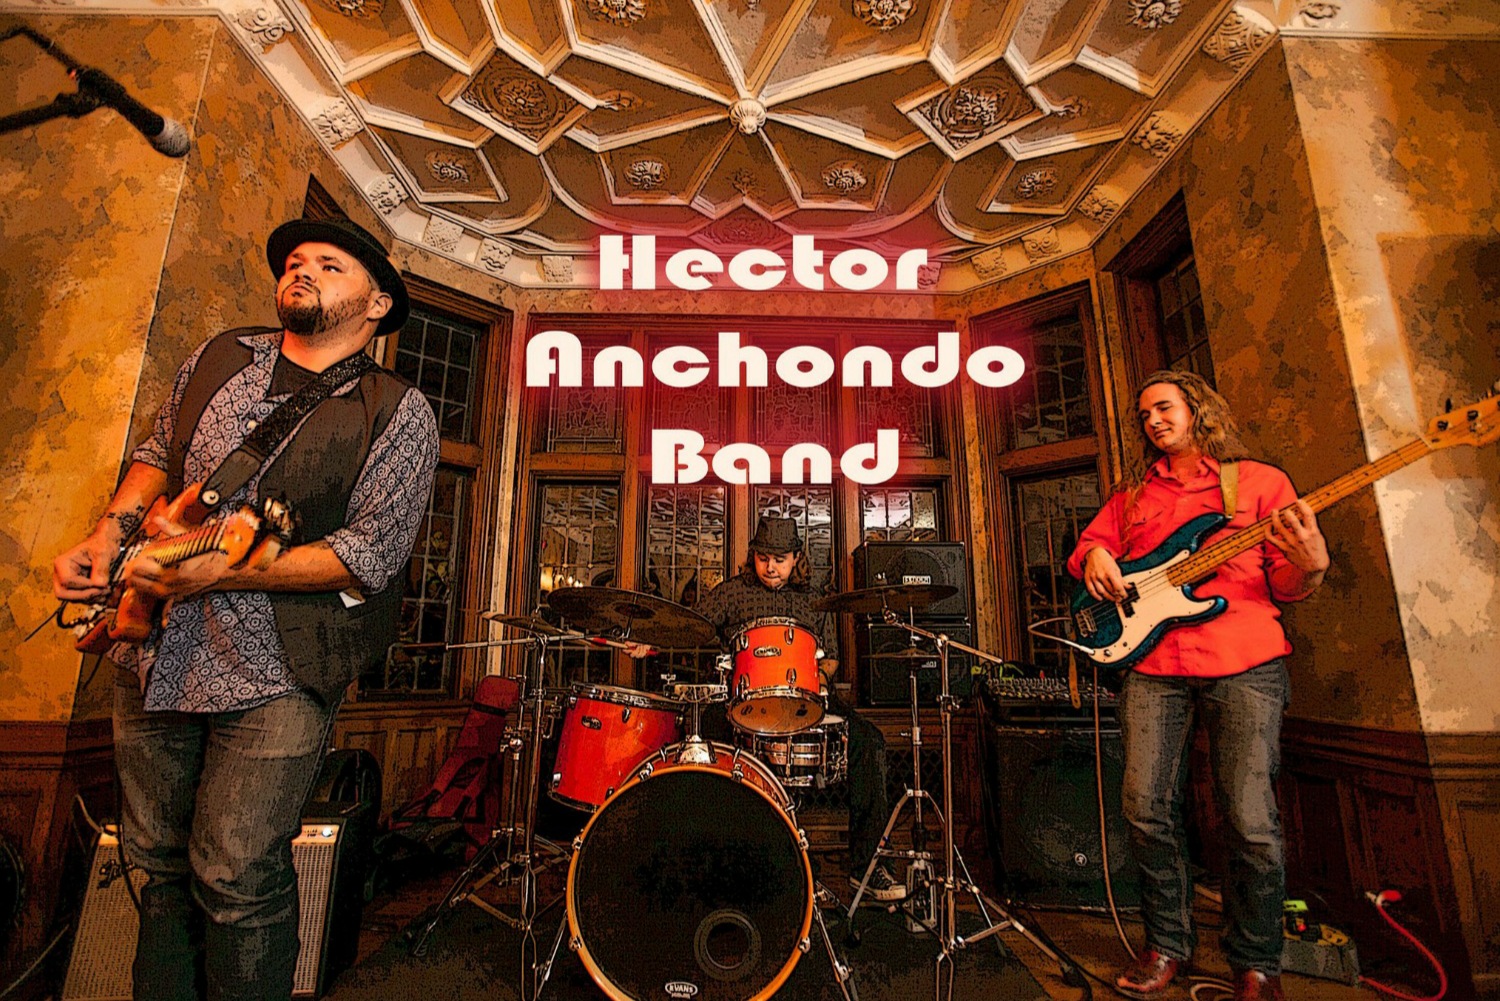 Live Music at The Office Bar in Norfolk, Nebraska - 
						Northeast Nebraska Musician Hector Anchondo 
						performing live at the 
						New Year's Eve Party at 
						The Office Bar in Norfolk, Nebraska 
						on Thursday, December 31, 2015. 
						The Office Bar is located at 
						120 S 4th Street, 
						Norfolk, NE 68701, 
						Phone: (402) 371-9919.